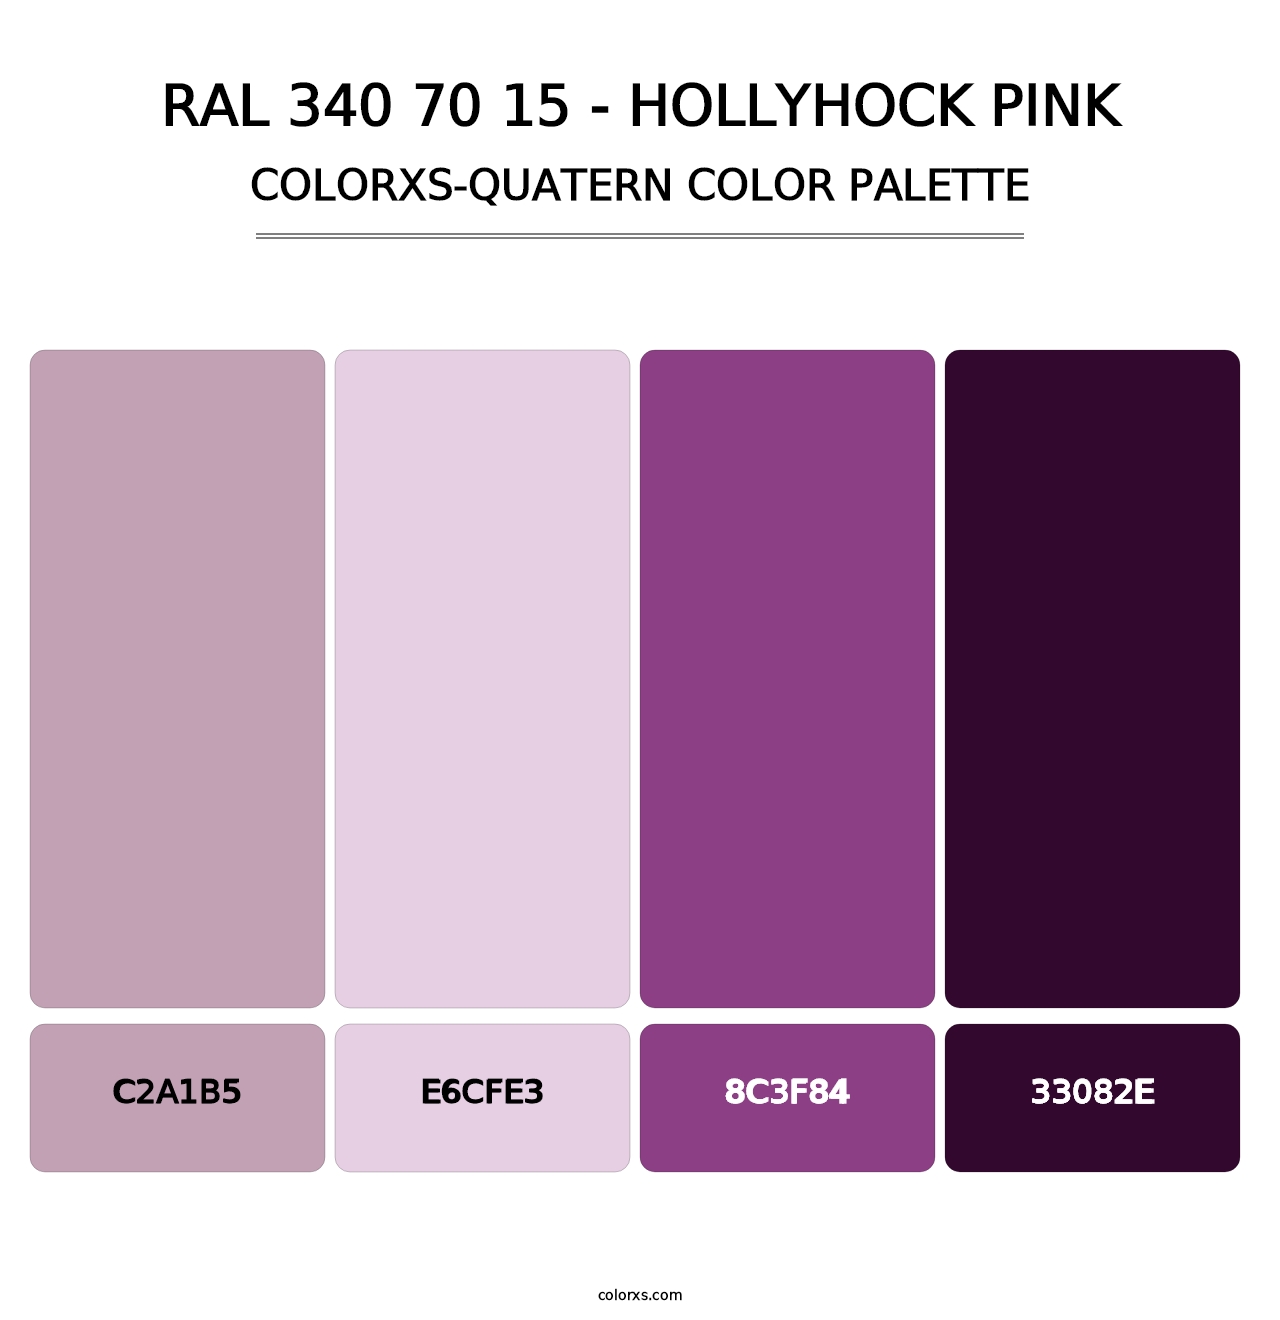 RAL 340 70 15 - Hollyhock Pink - Colorxs Quatern Palette